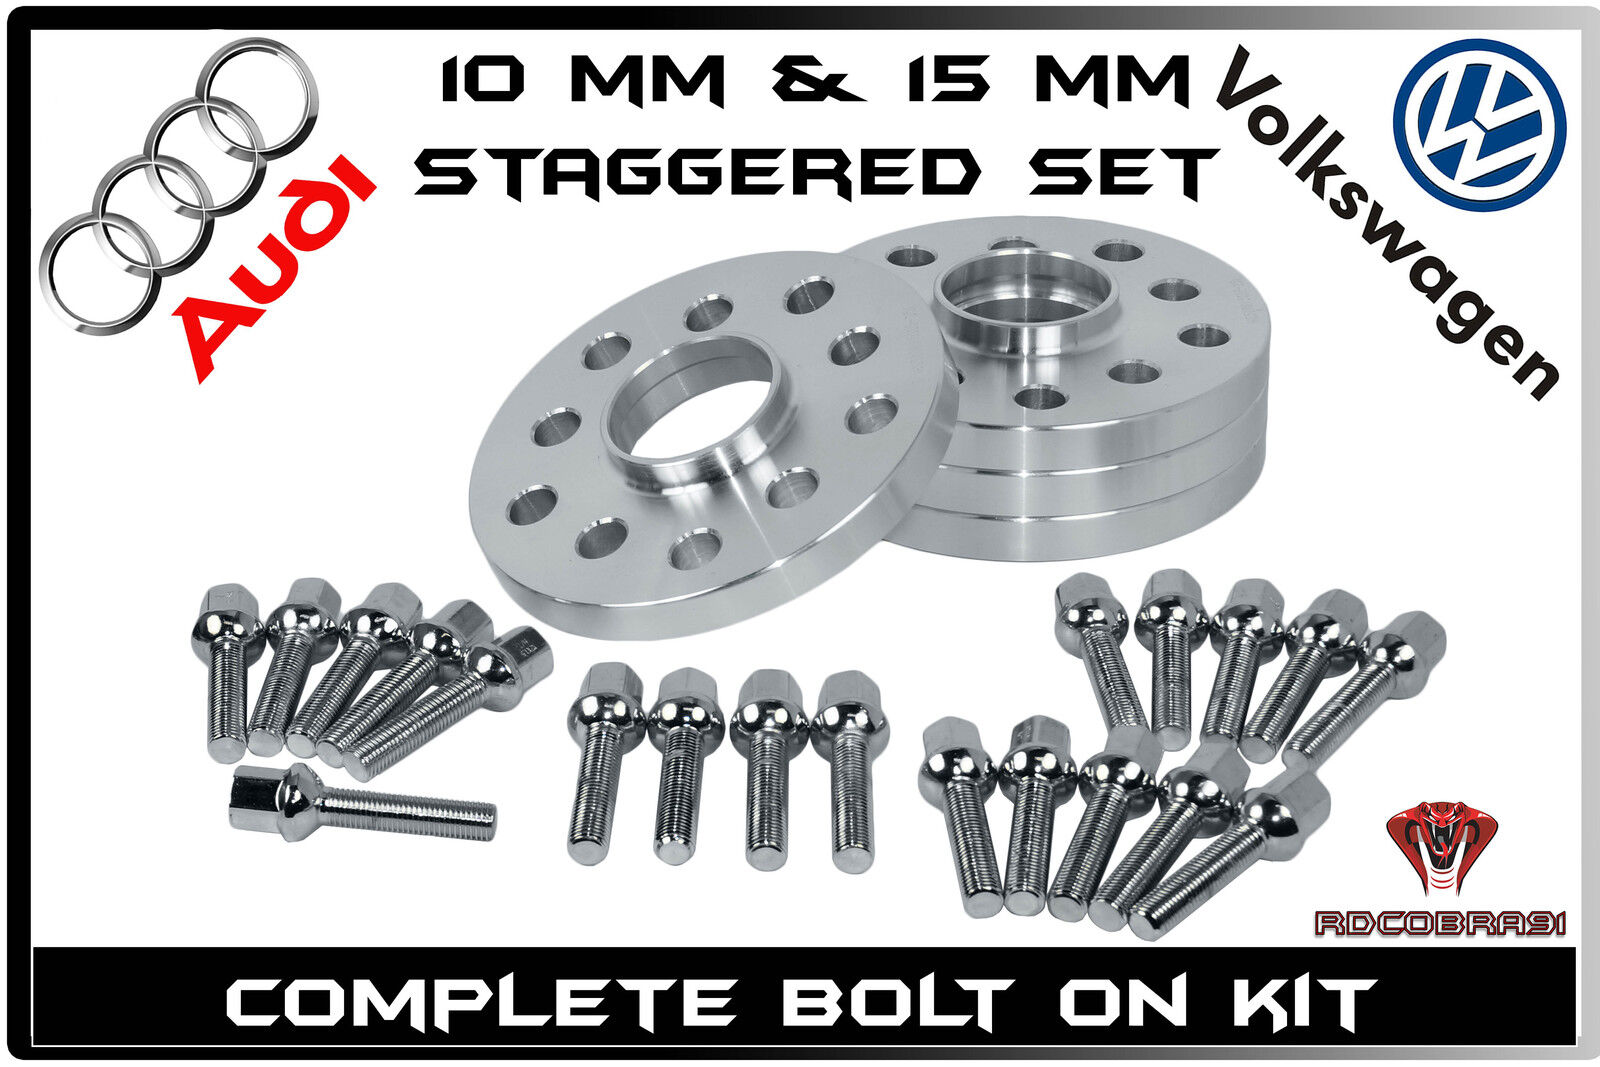 4 Pc Audi VolksWagen Staggered 10 MM & 15 MM Wheel Spacers 5x100 5x112 57.1 H.B